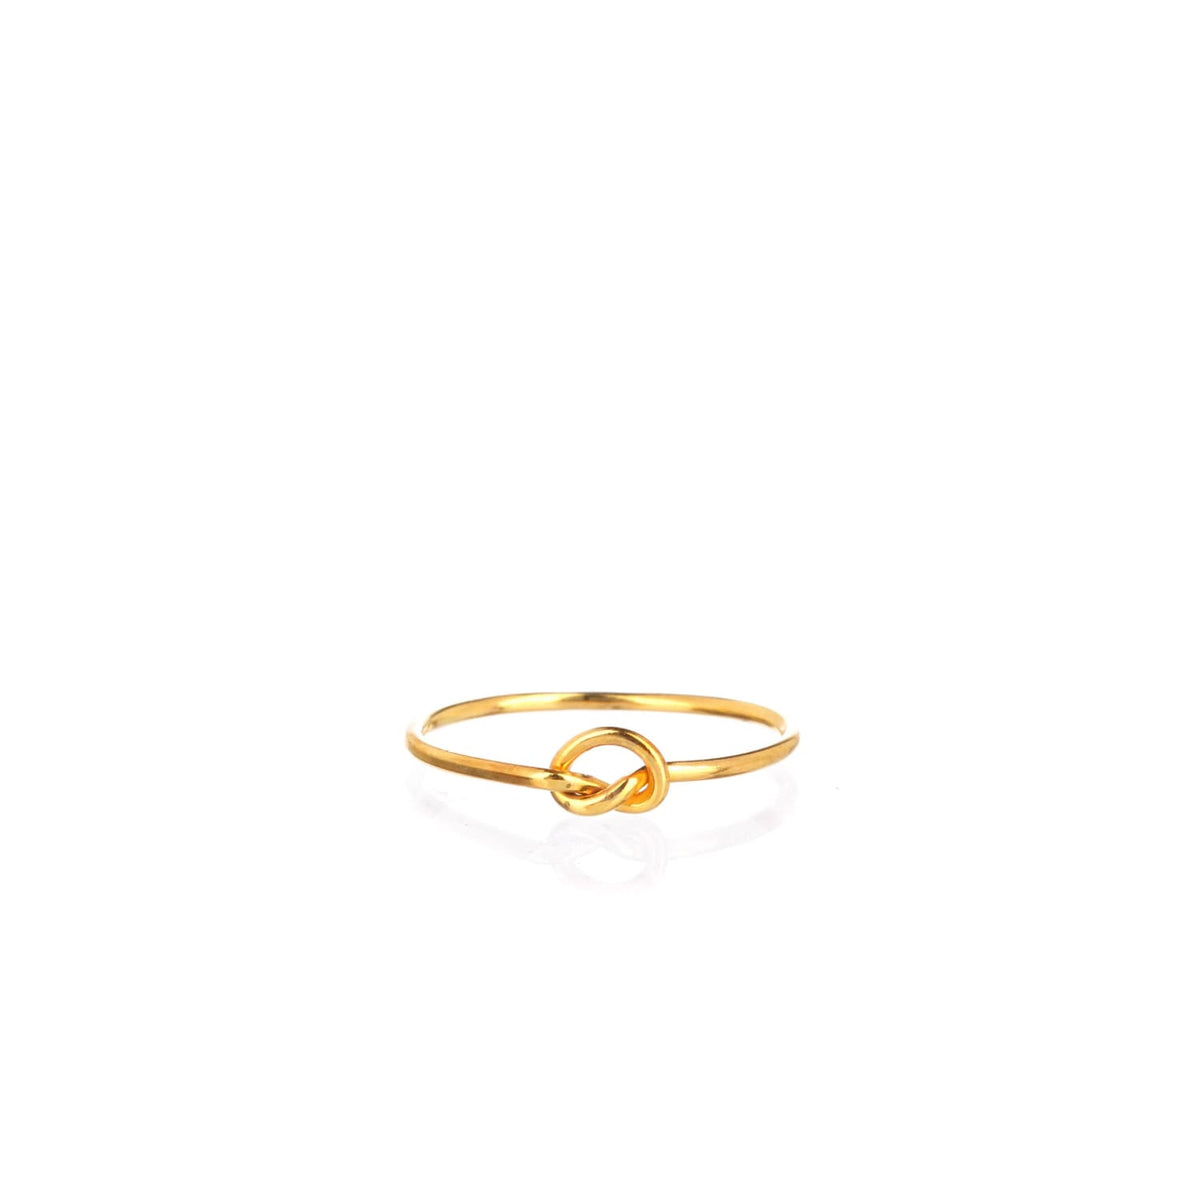 Single Love Knot Ring 14k Yellow Gold Filled Valentines Day